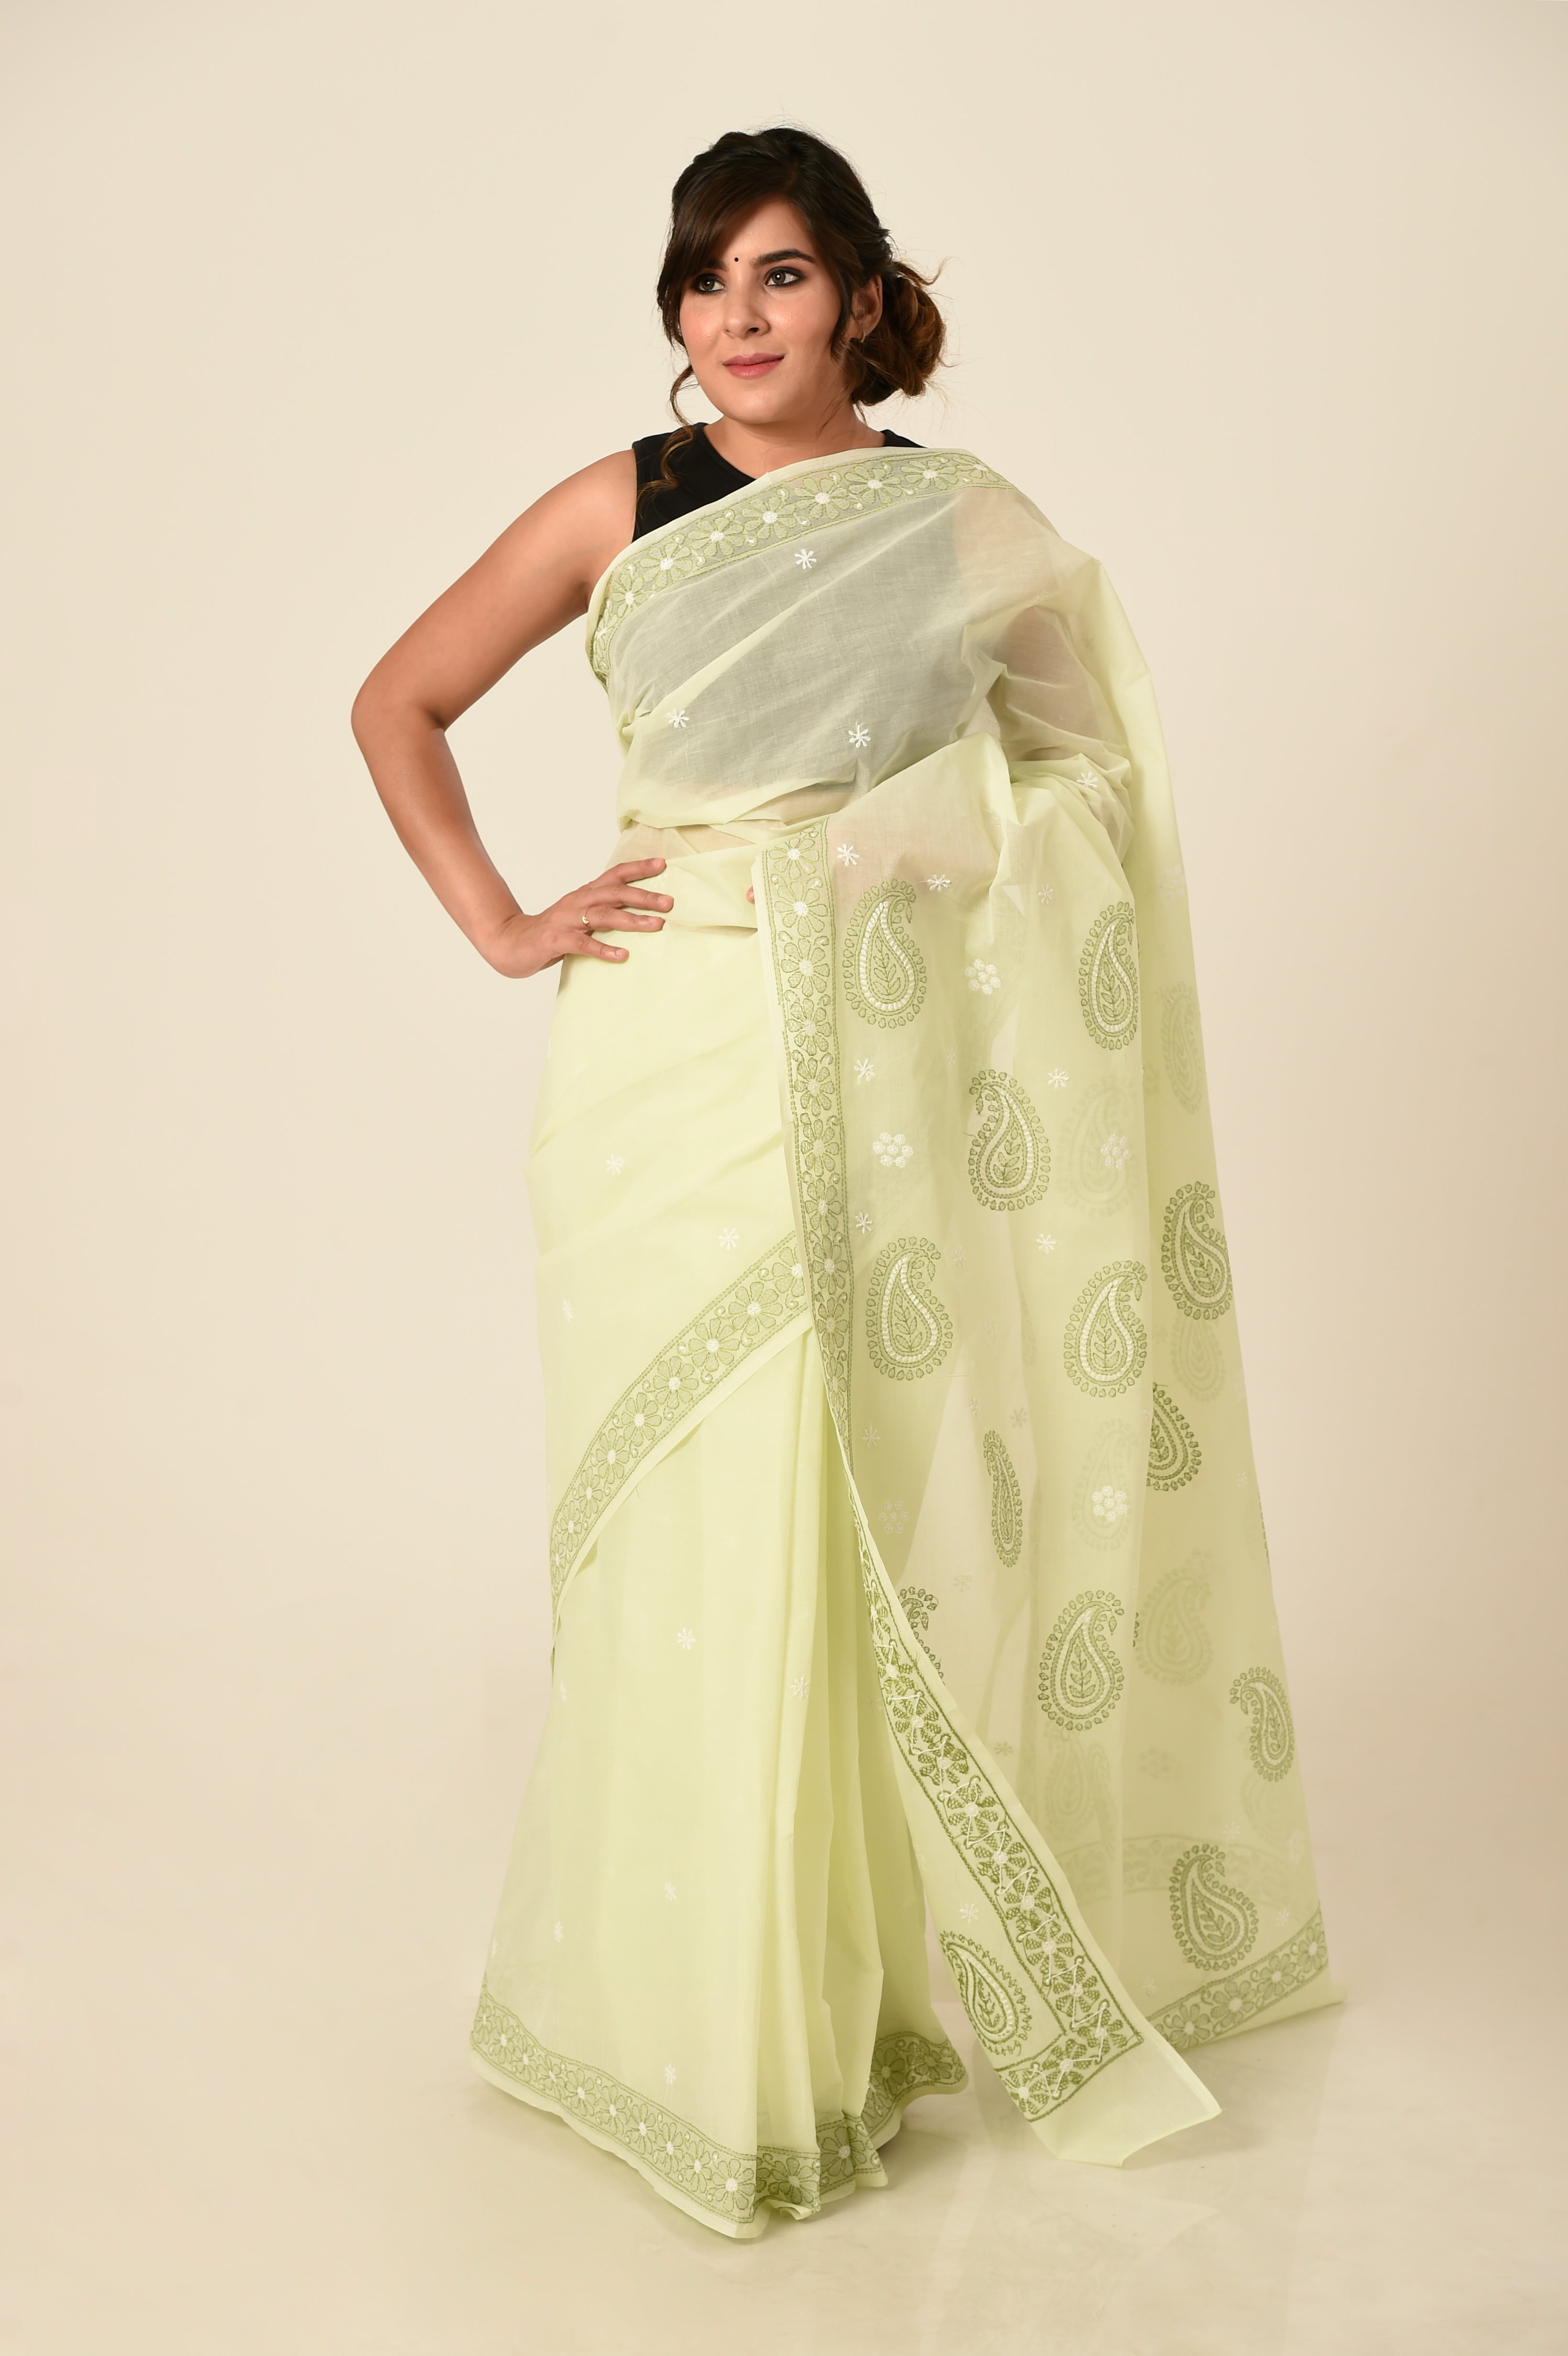 Lucknow Chikan Emporium Cotton Saree Light Green Colour with same colour blouse piece included.